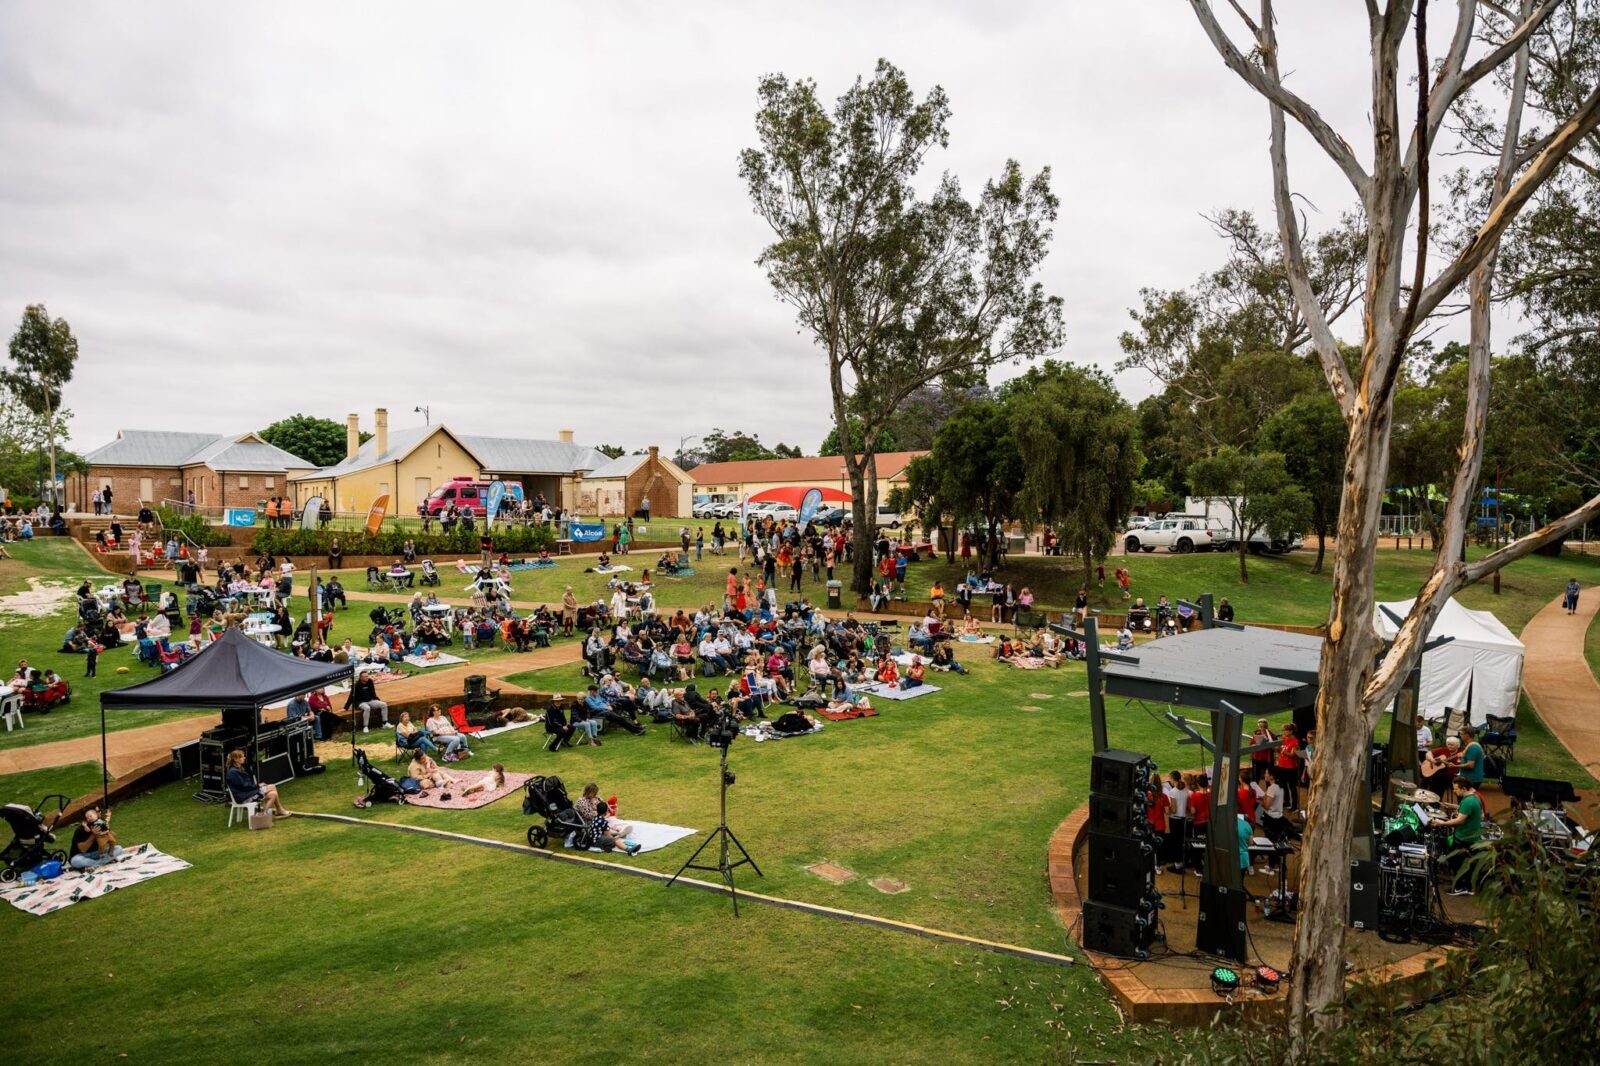 view of event attendees sitting on grass